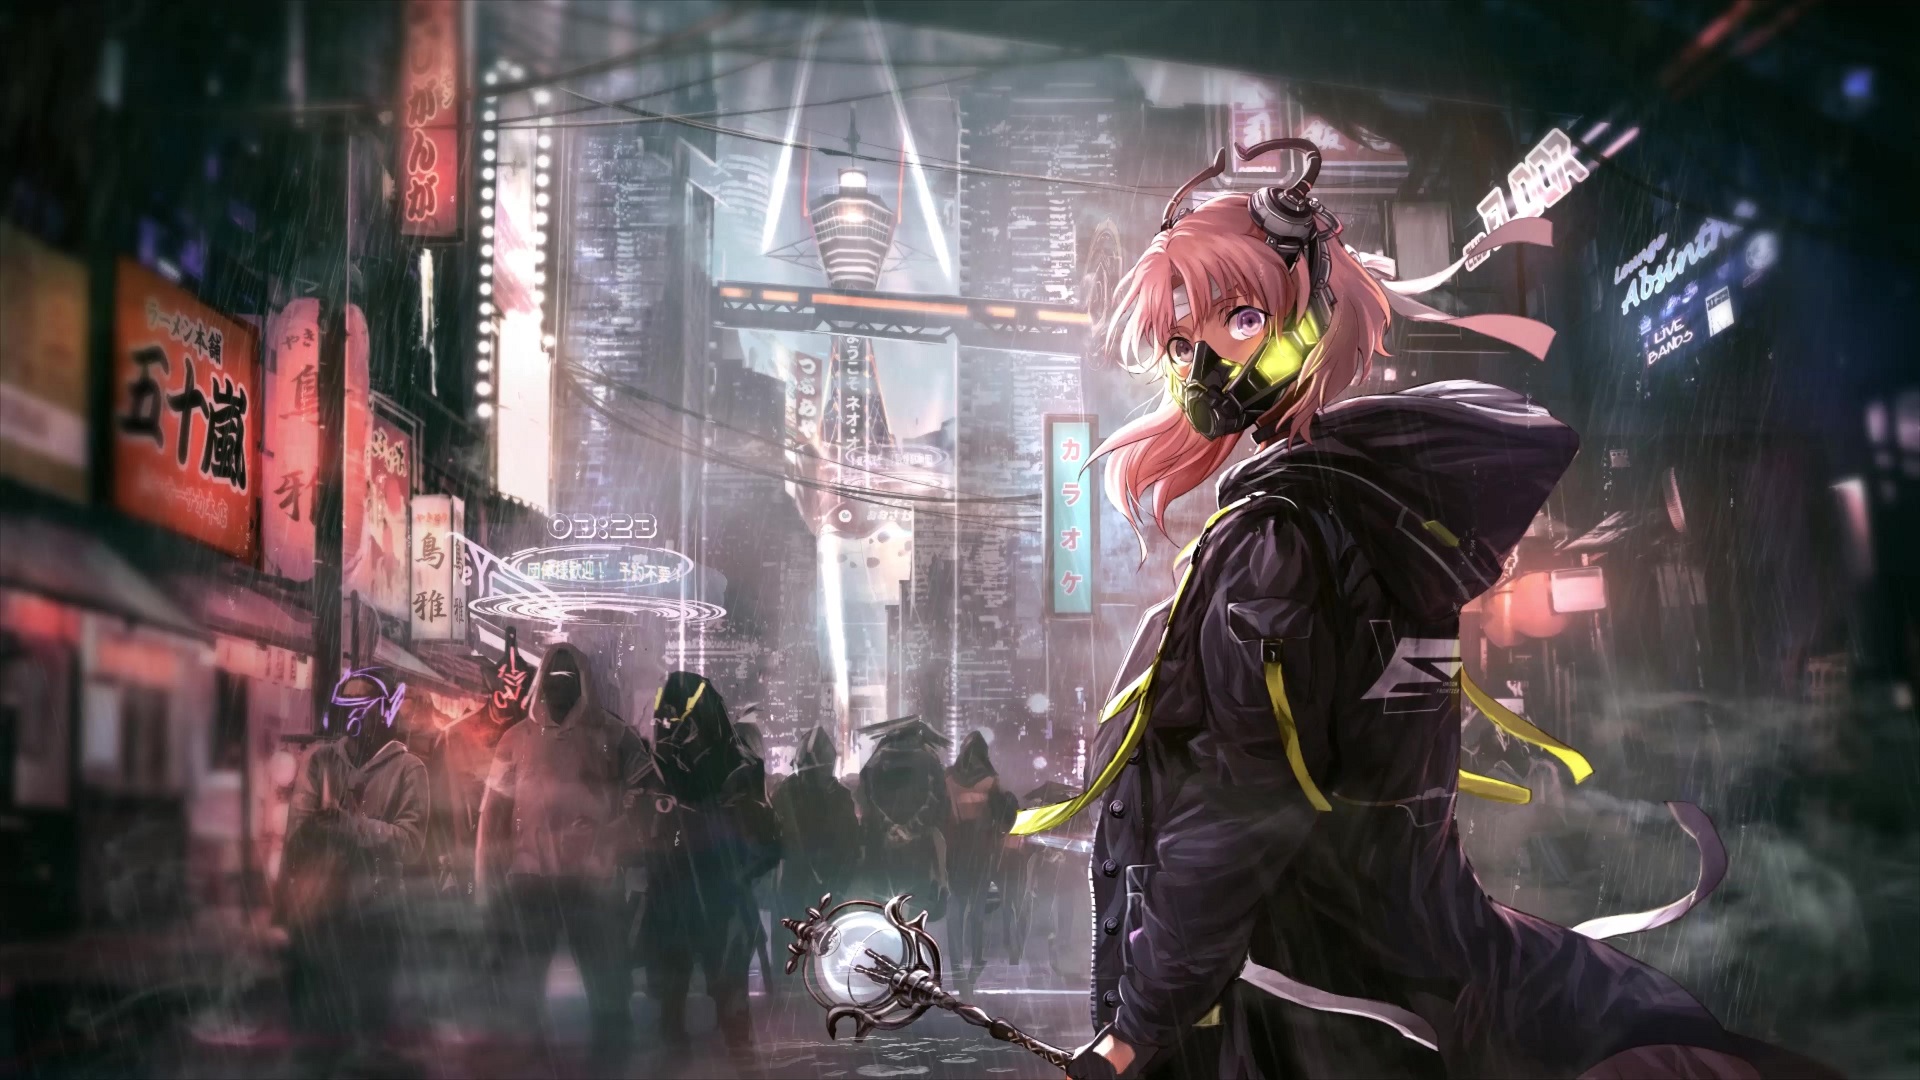 Sci Fi anime girl in front of robot with lightsaber 2K wallpaper download